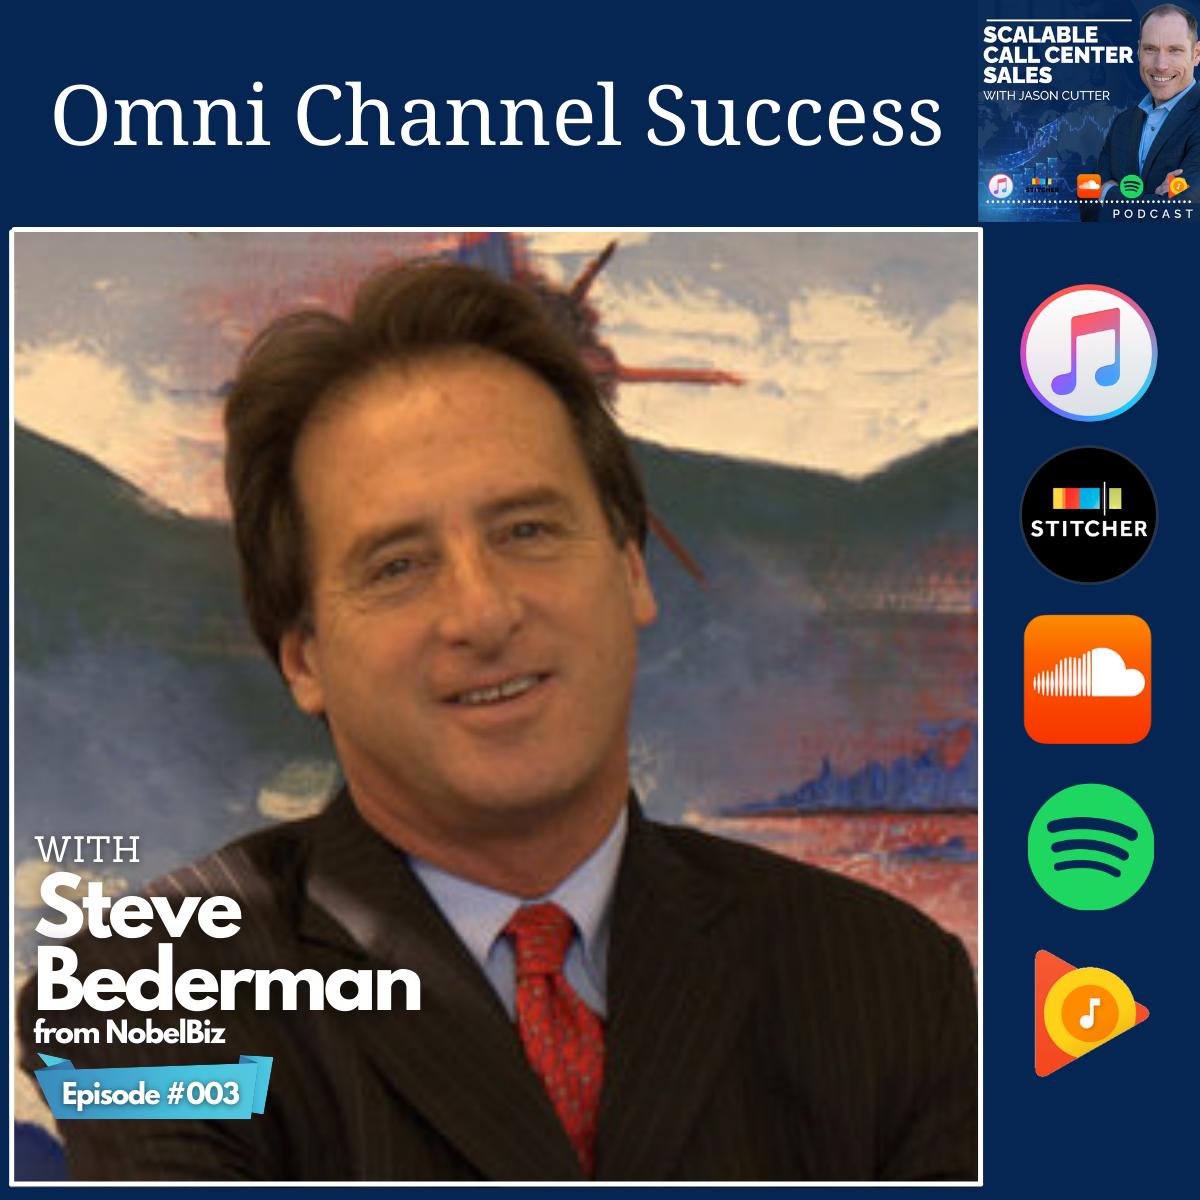 [003] Omni Channel Success, with Steve Bederman from NobelBiz